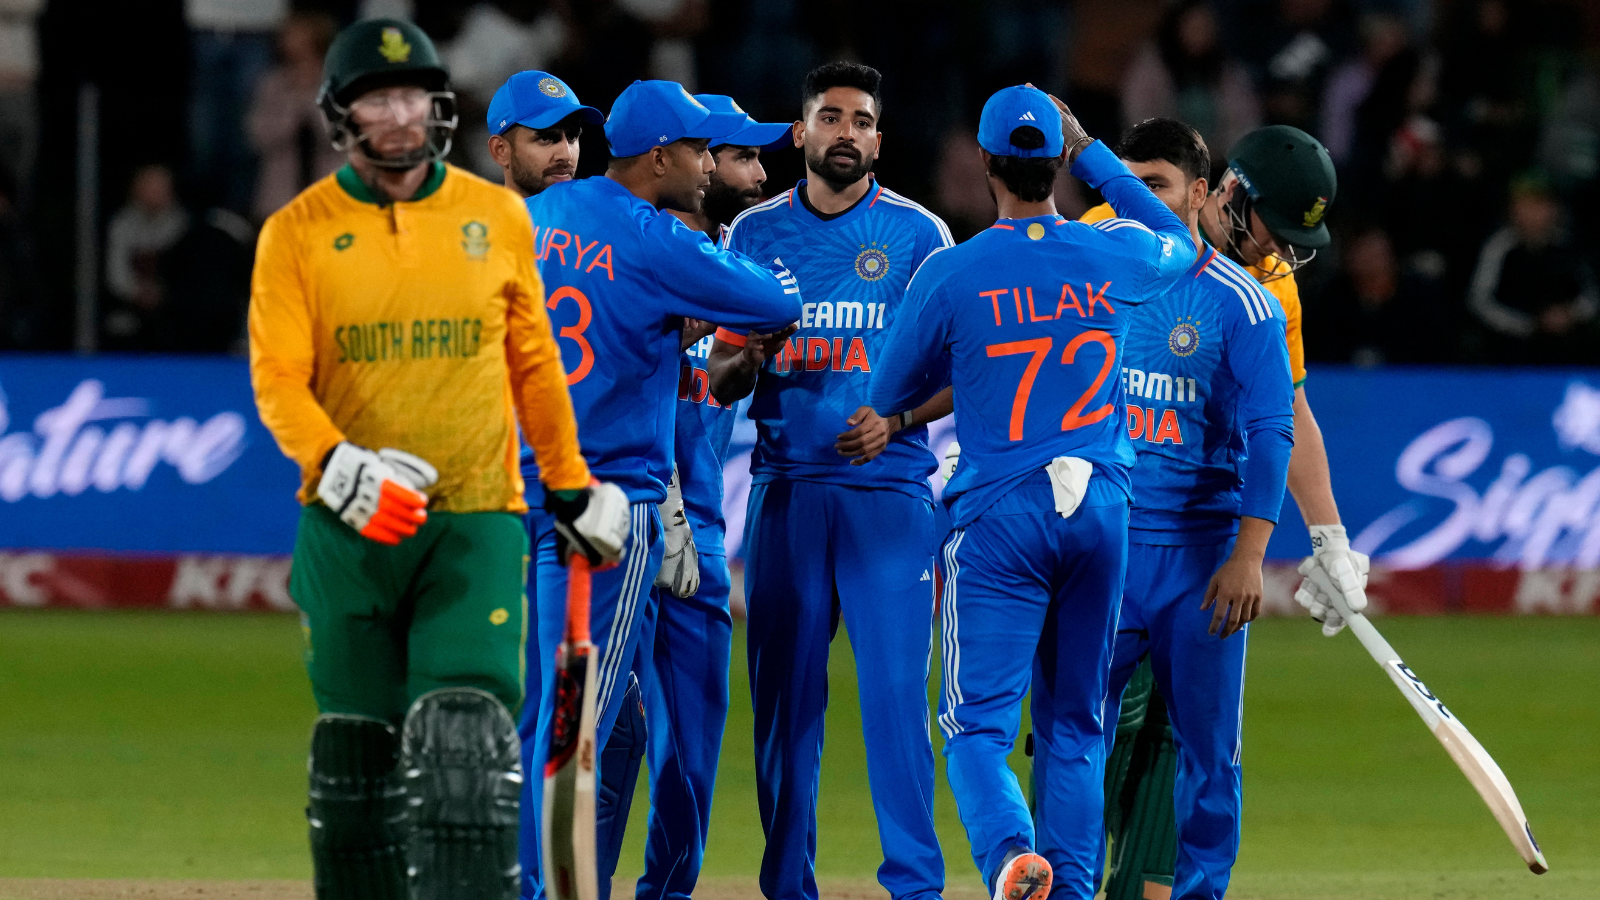 India vs South Africa Live Streaming, 3rd T20: When and where to